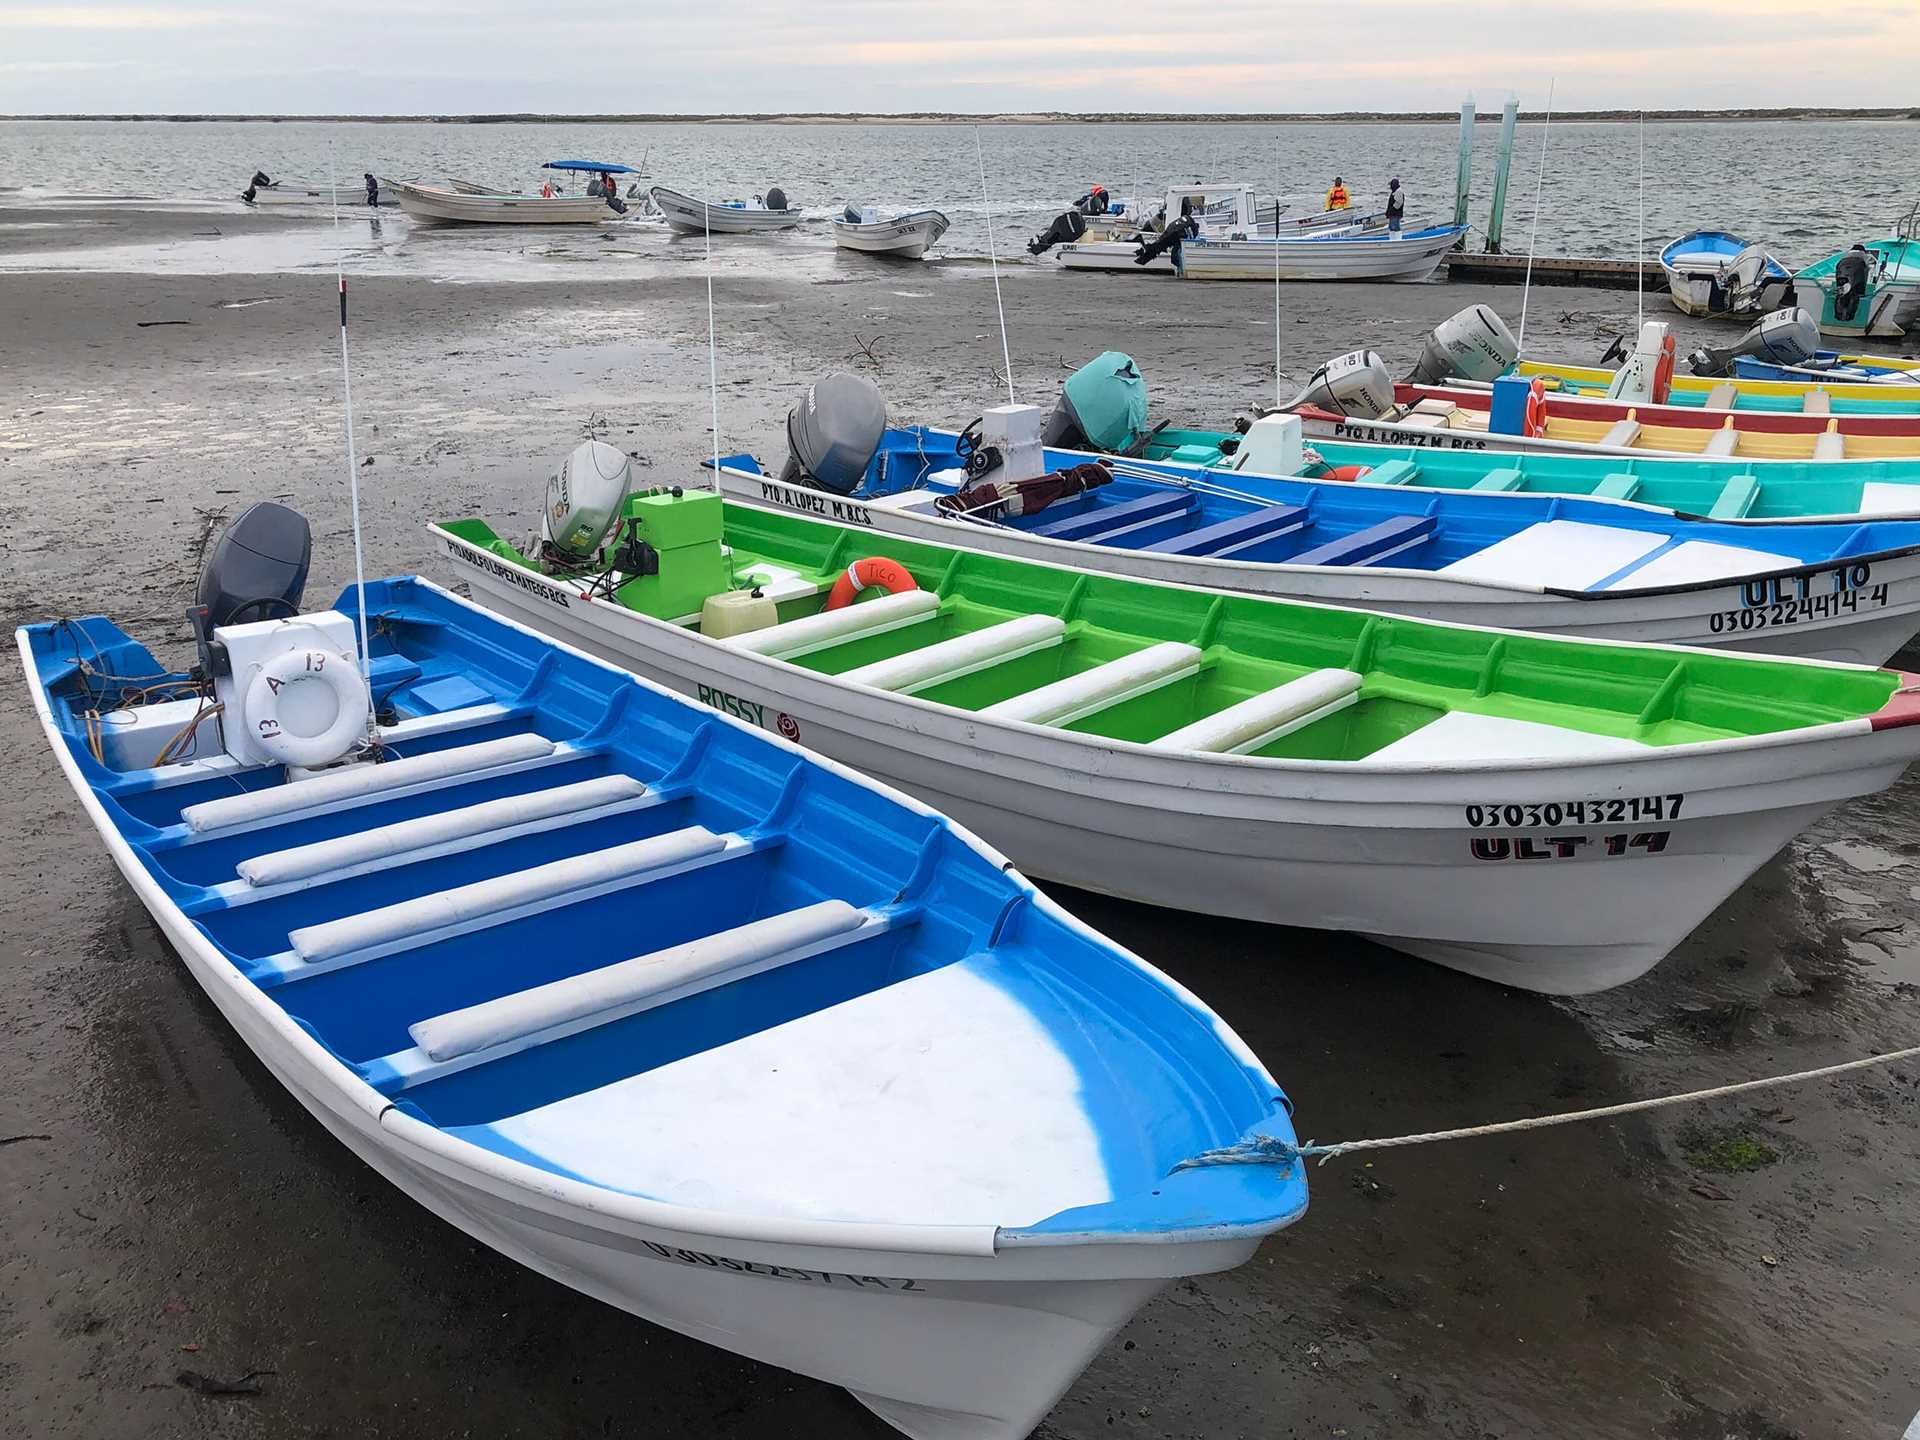 colorful boats on a beach